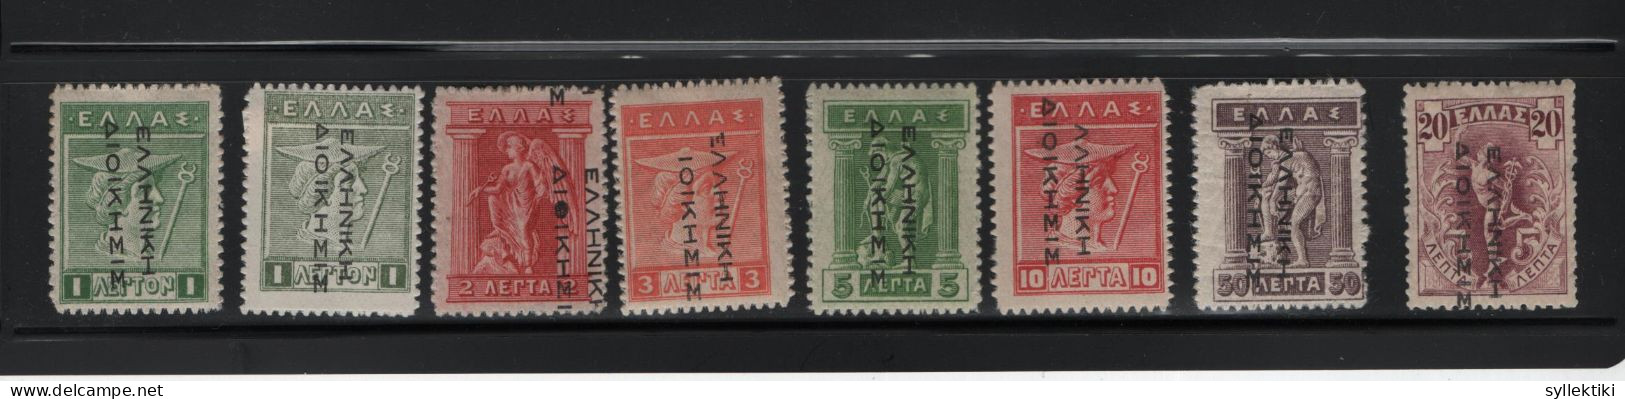 GREECE 1913 GREEK ADMIN READING DOWN 1 LEPTON - 20 LEPTA 8 DIFFERENT MH STAMPS  HELLAS No 251 - 255, 258 - 260 AND VALU - Unused Stamps